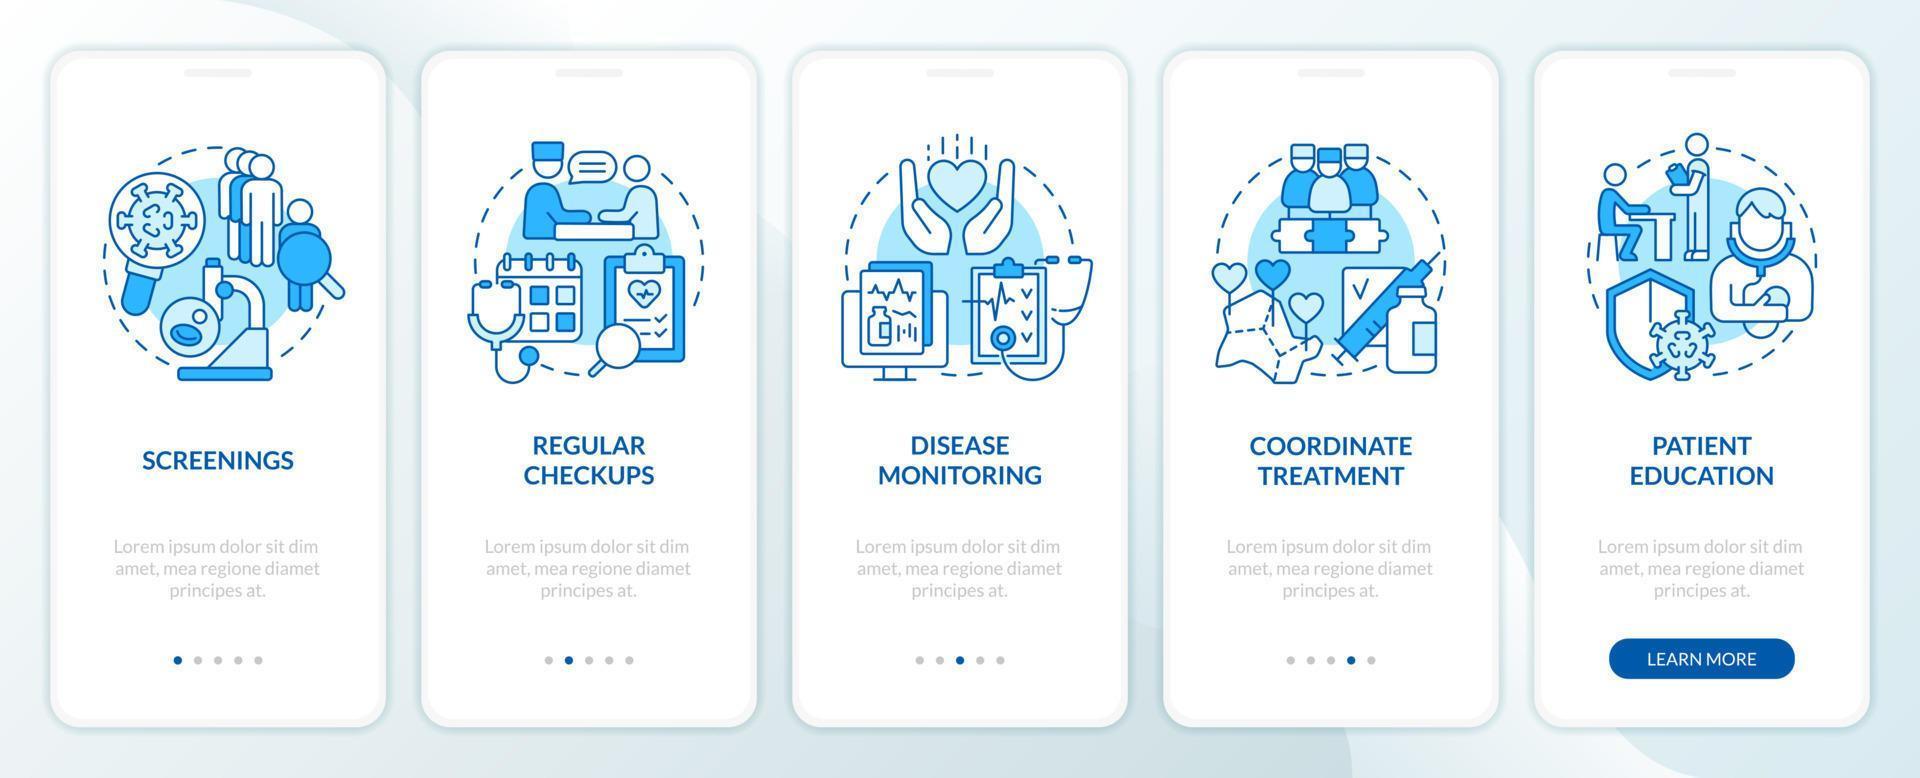 Chronic disease management approach blue onboarding mobile app screen. Walkthrough 5 steps editable graphic instructions with linear concepts. UI, UX, GUI template vector